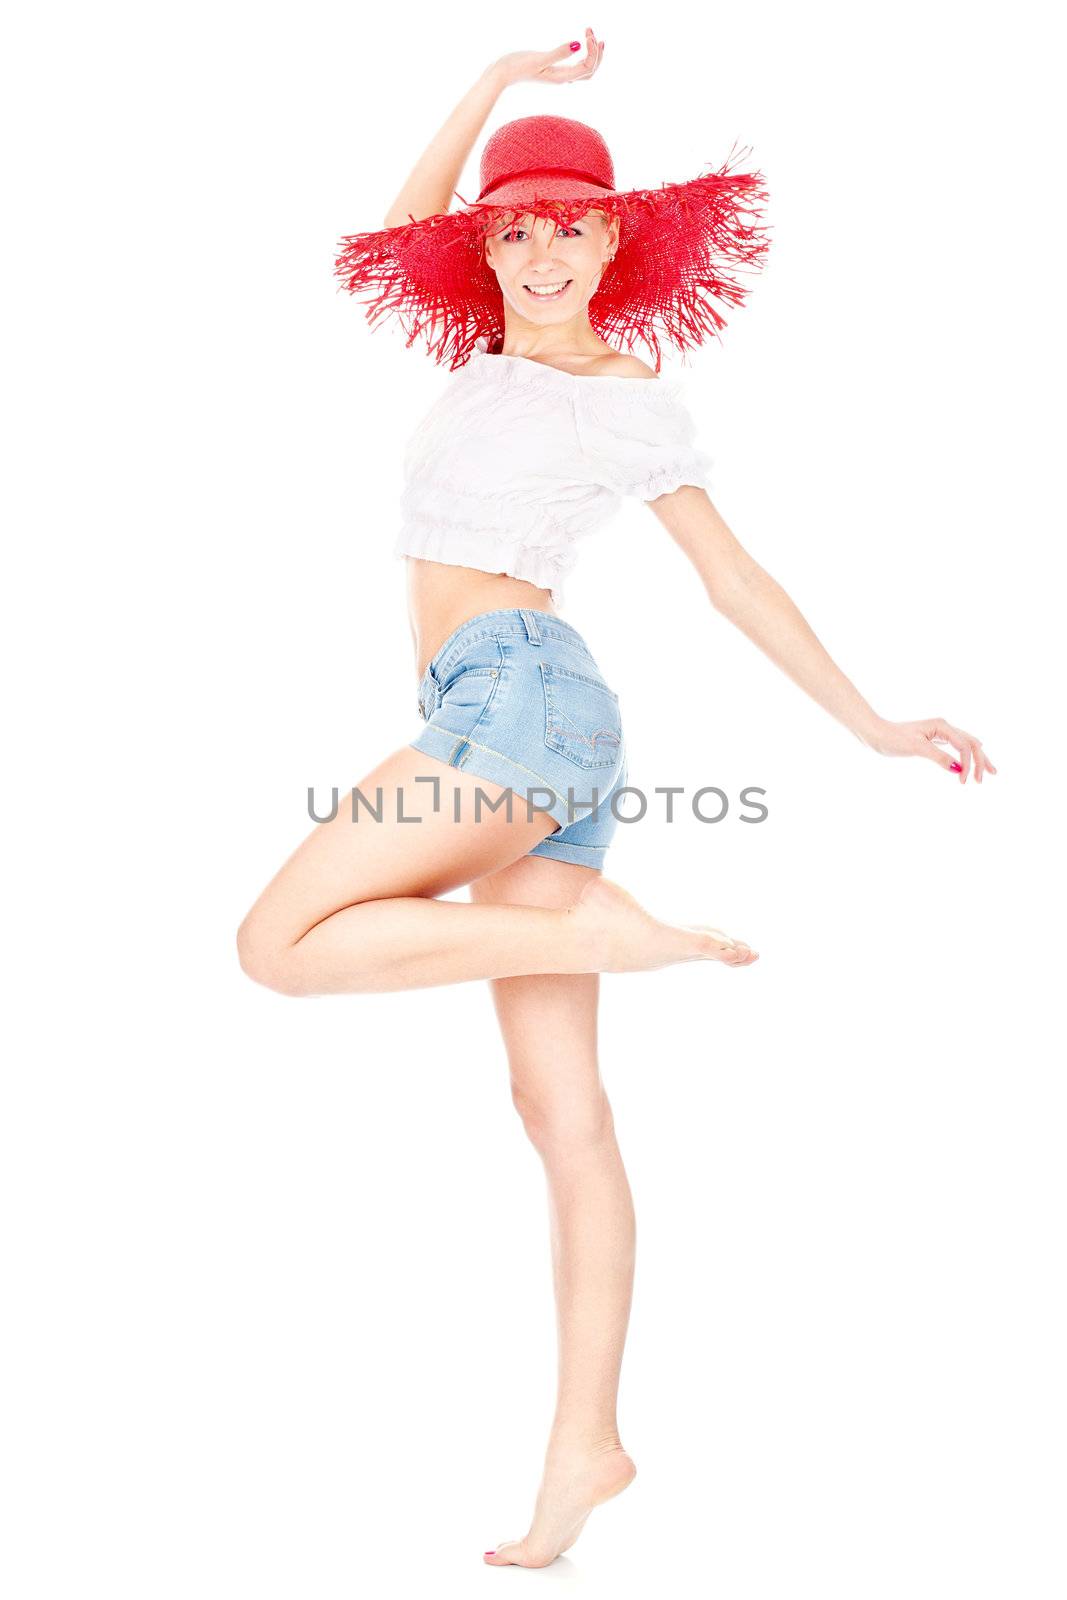 Happy young woman with big red hat barefoot dancing, isolated on white background